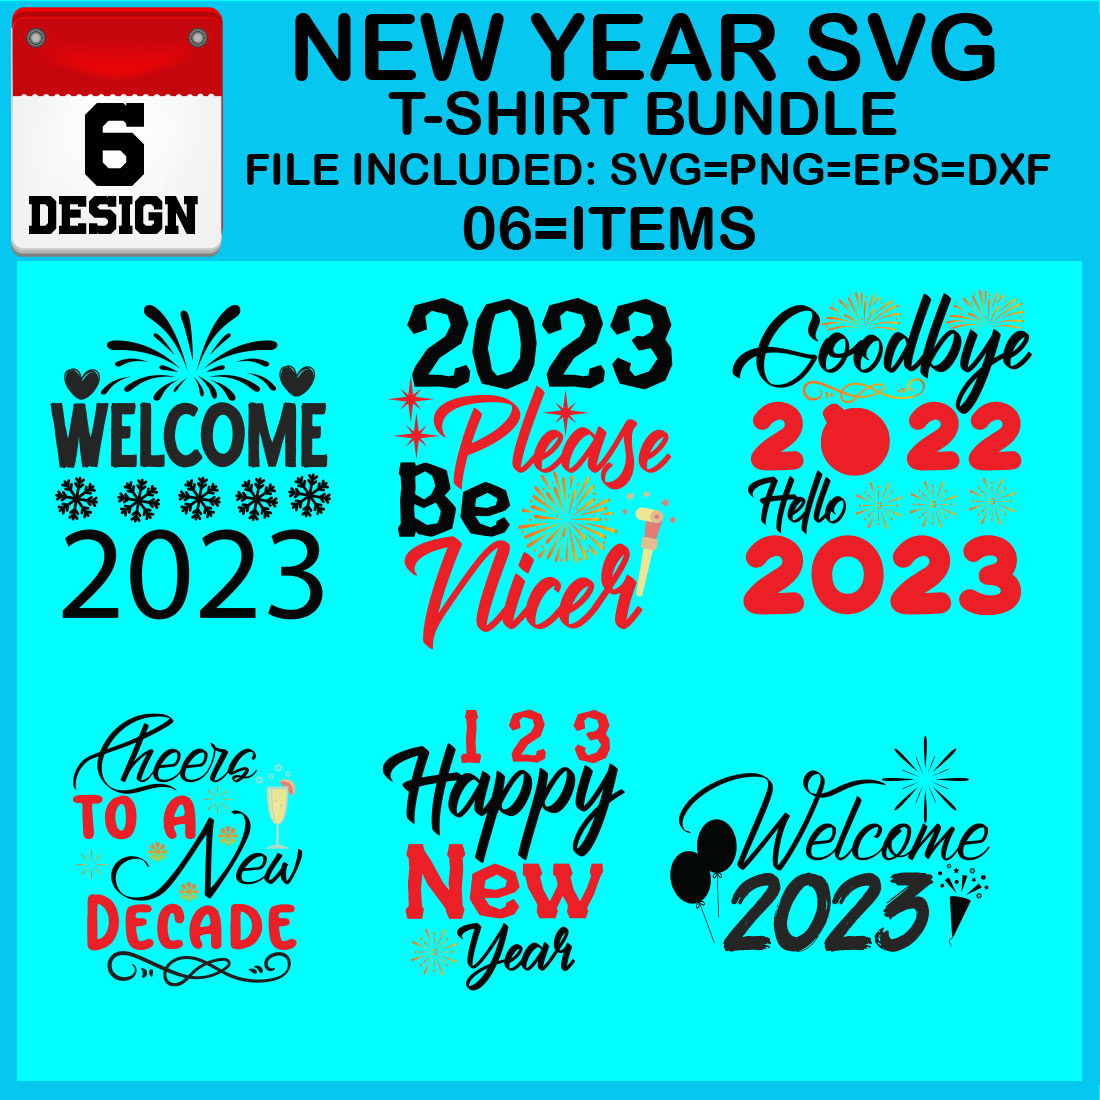 New Year 6 SVG T-shirt Bundle cover image.